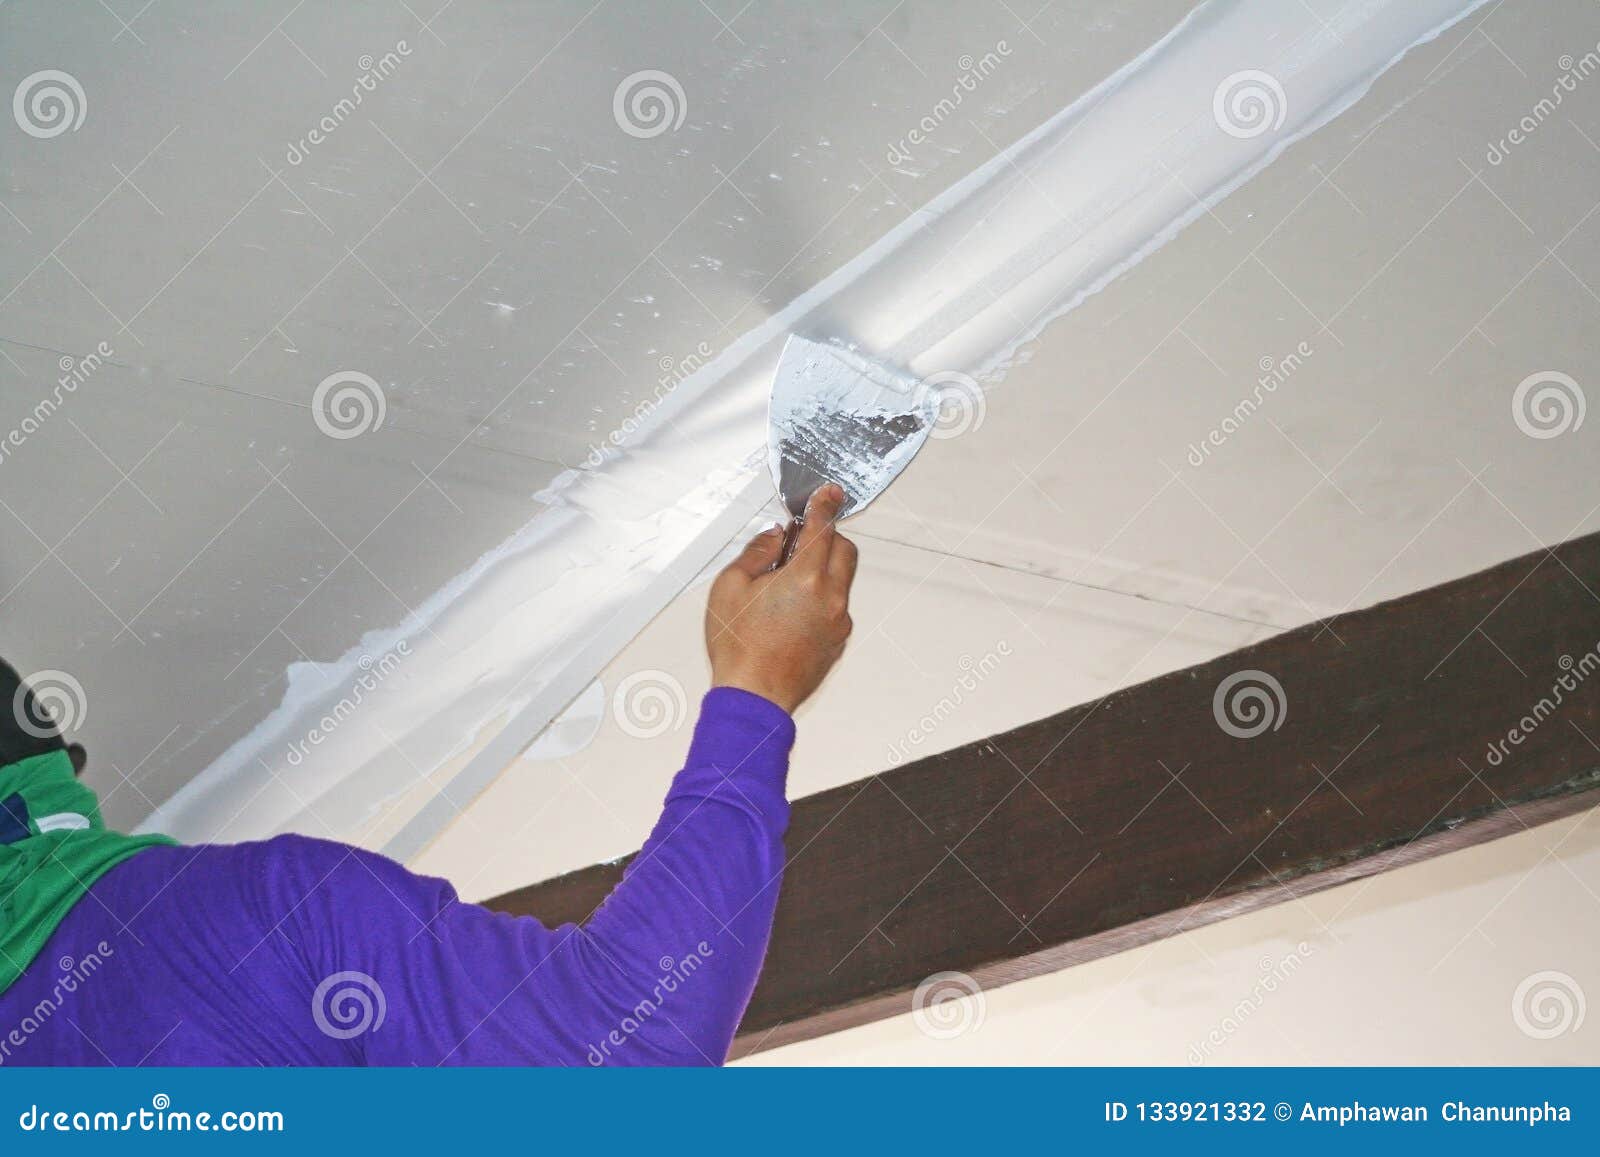 Worker Using Plaster Gypsum On Putty Knife At Ceiling Stock Photo